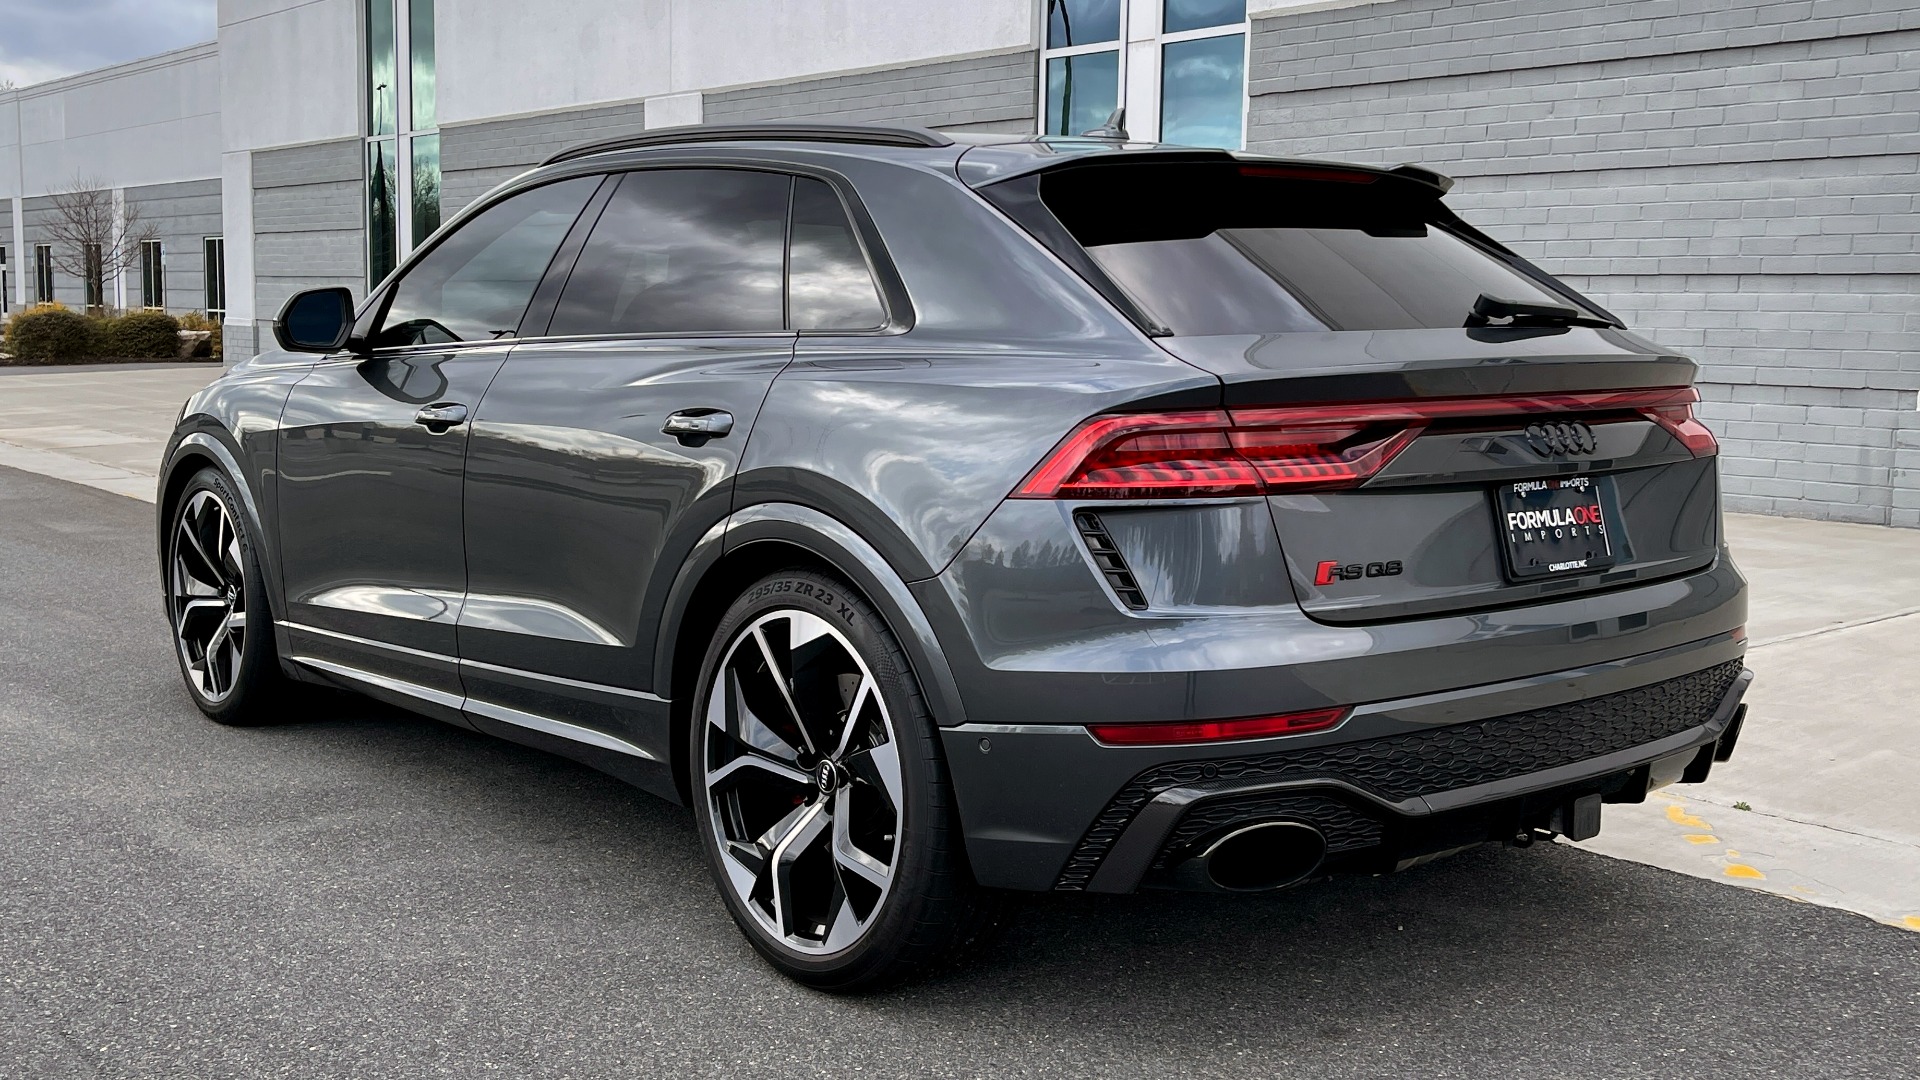 Used 2021 Audi RS Q8 4.0 TFSI 591HP / CARBON OPTIC / BLACK OPTIC / / B&O SND / REARVIEW for sale Sold at Formula Imports in Charlotte NC 28227 5